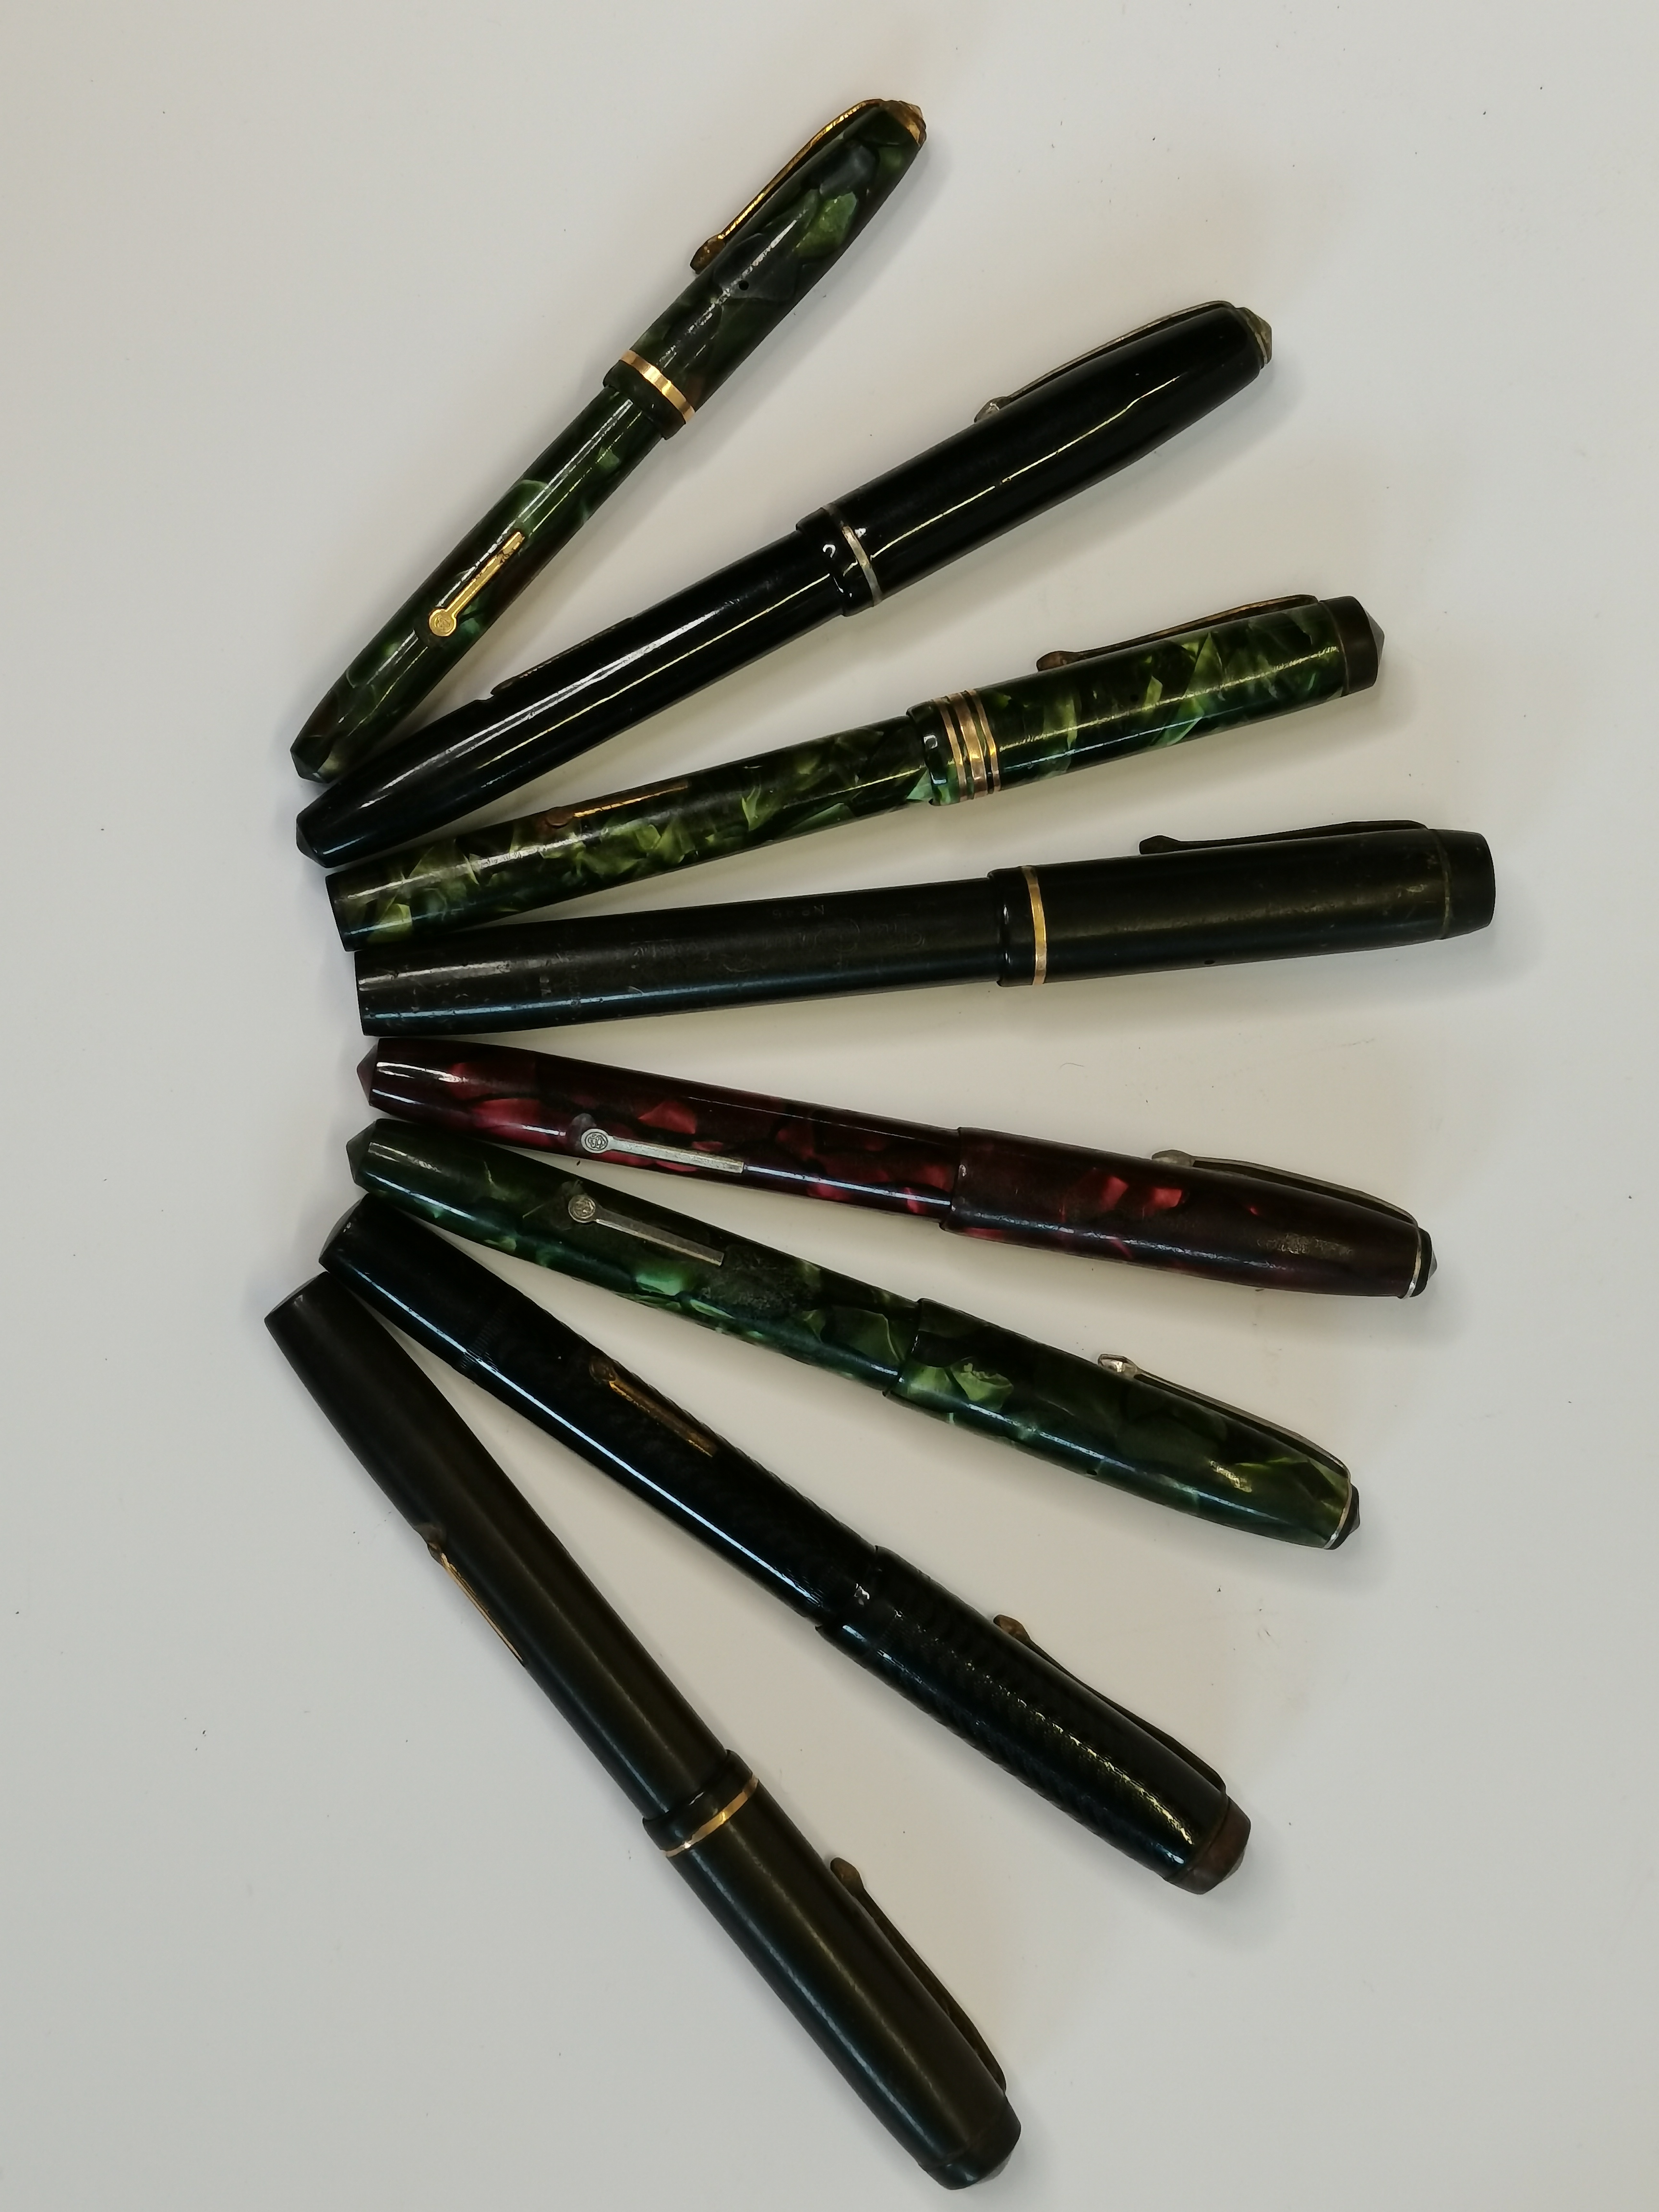 8 x Conway Stewart Vintage Fountain Pens - Image 2 of 2